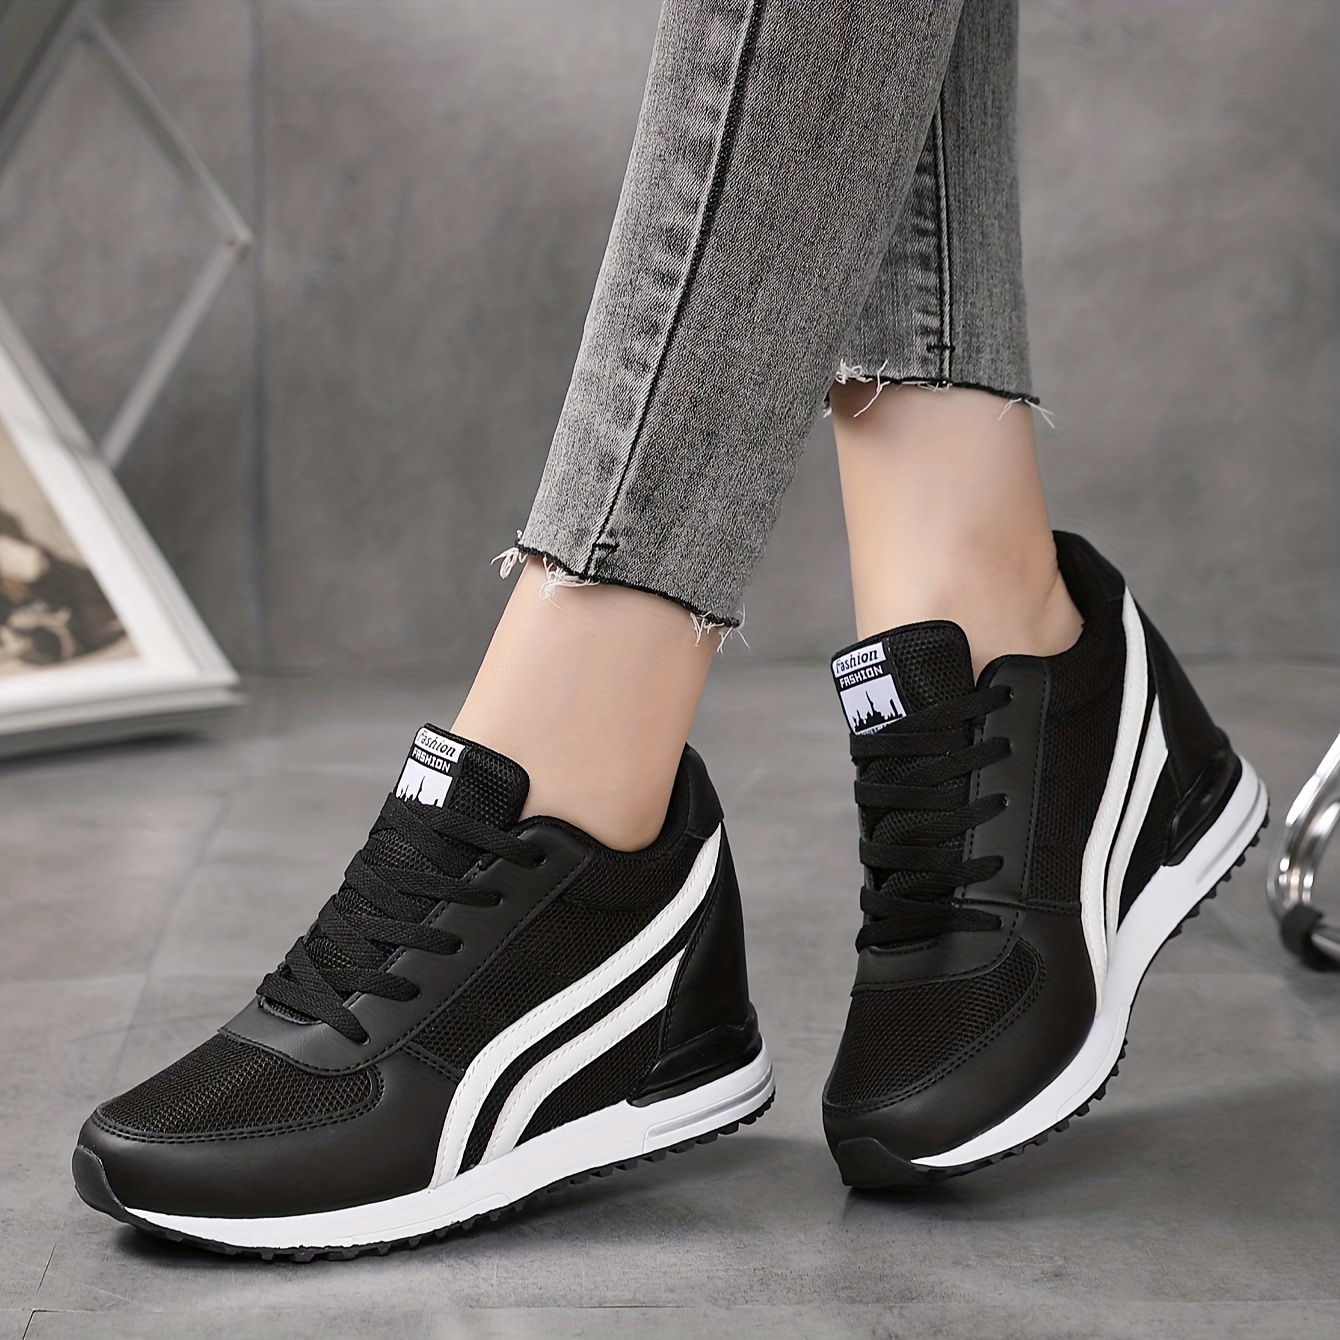 Women Casual Lace Up Wedge Sport Shoes Platform High Heel Sneaker Shoes  Creepers